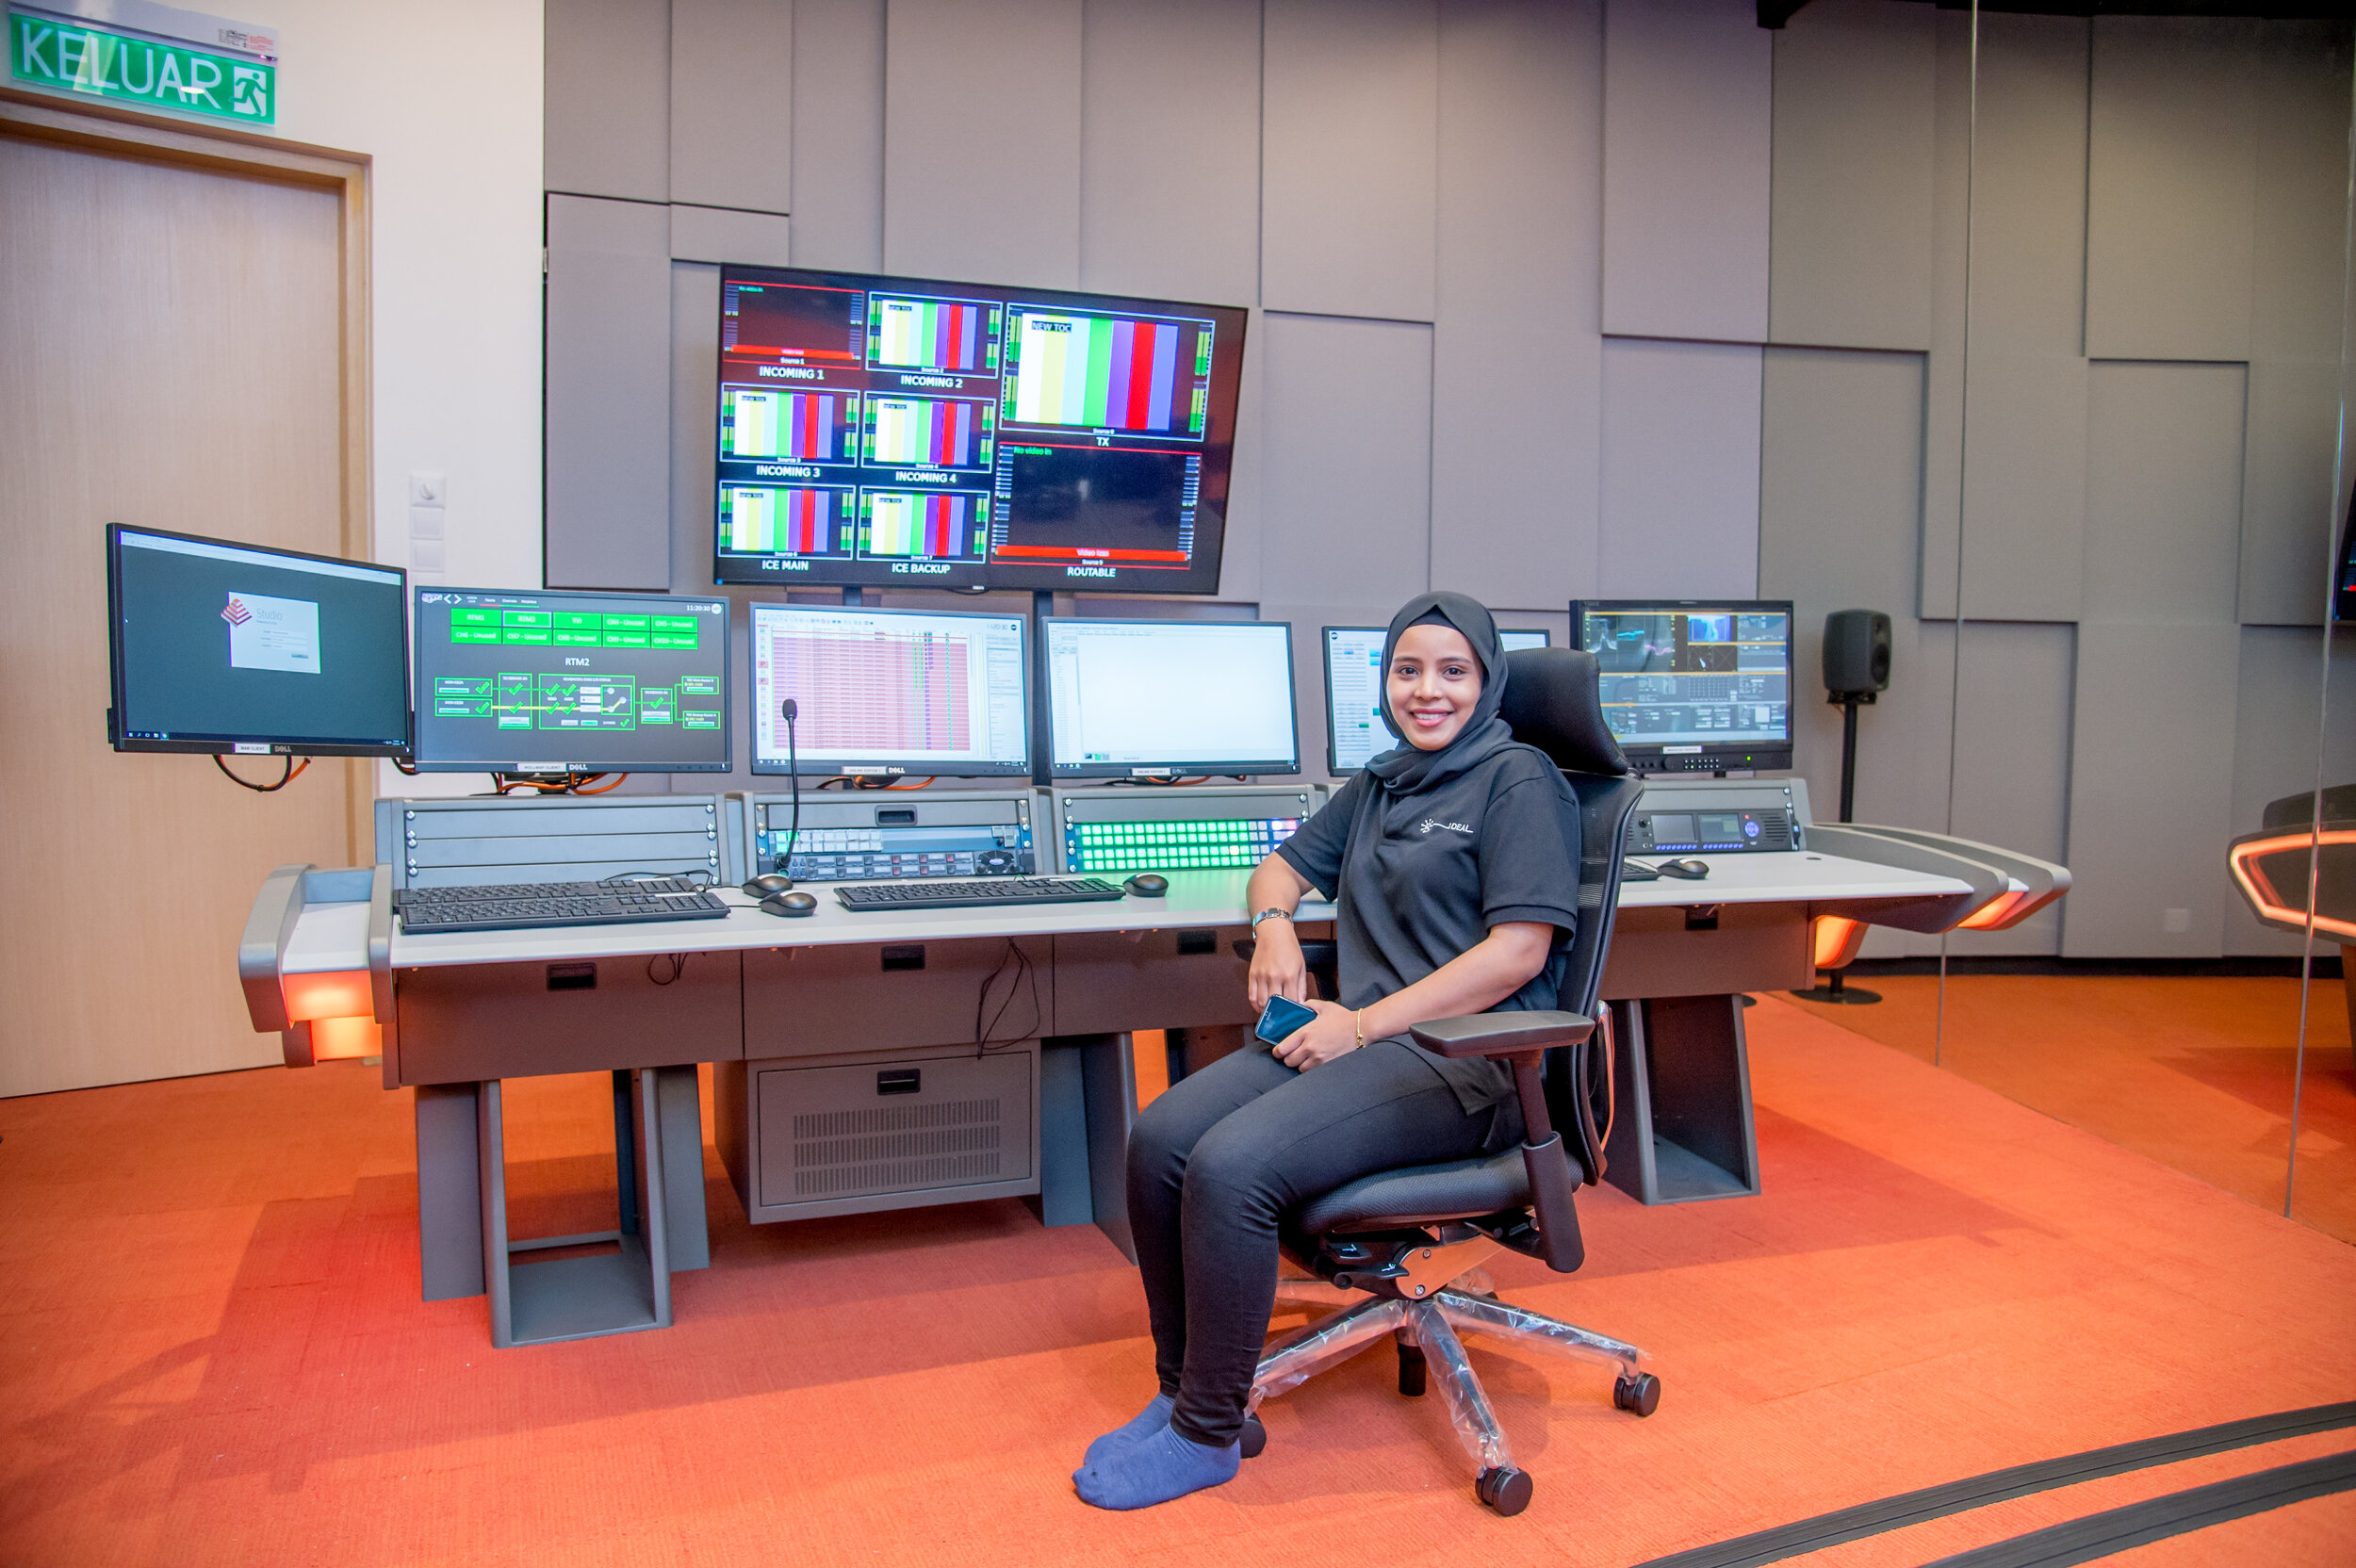 MALAYSIA'S NATIONAL BROADCASTER RTM